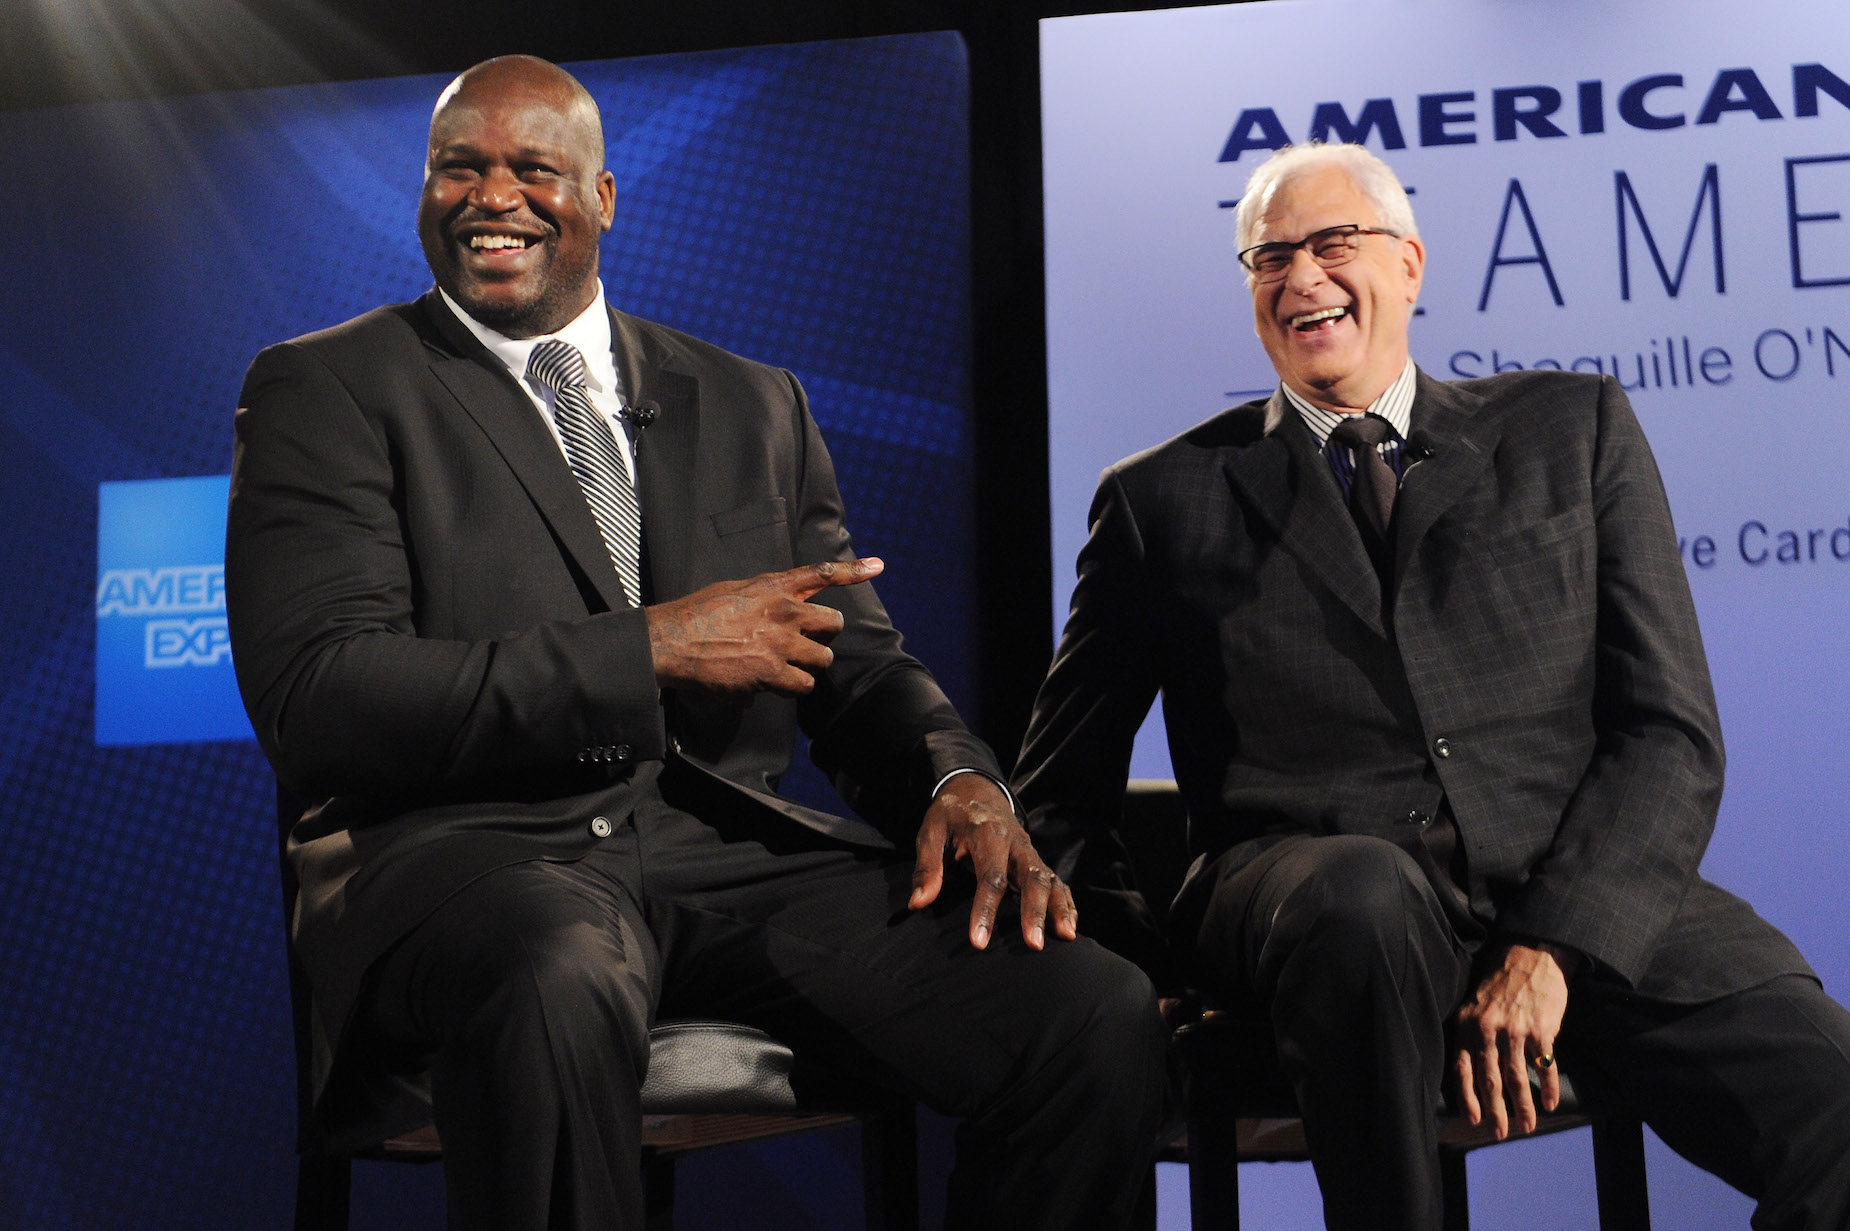 Shaquille O’Neal Just Revealed How Phil Jackson’s Advice Helped Make Him a Successful Entrepreneur